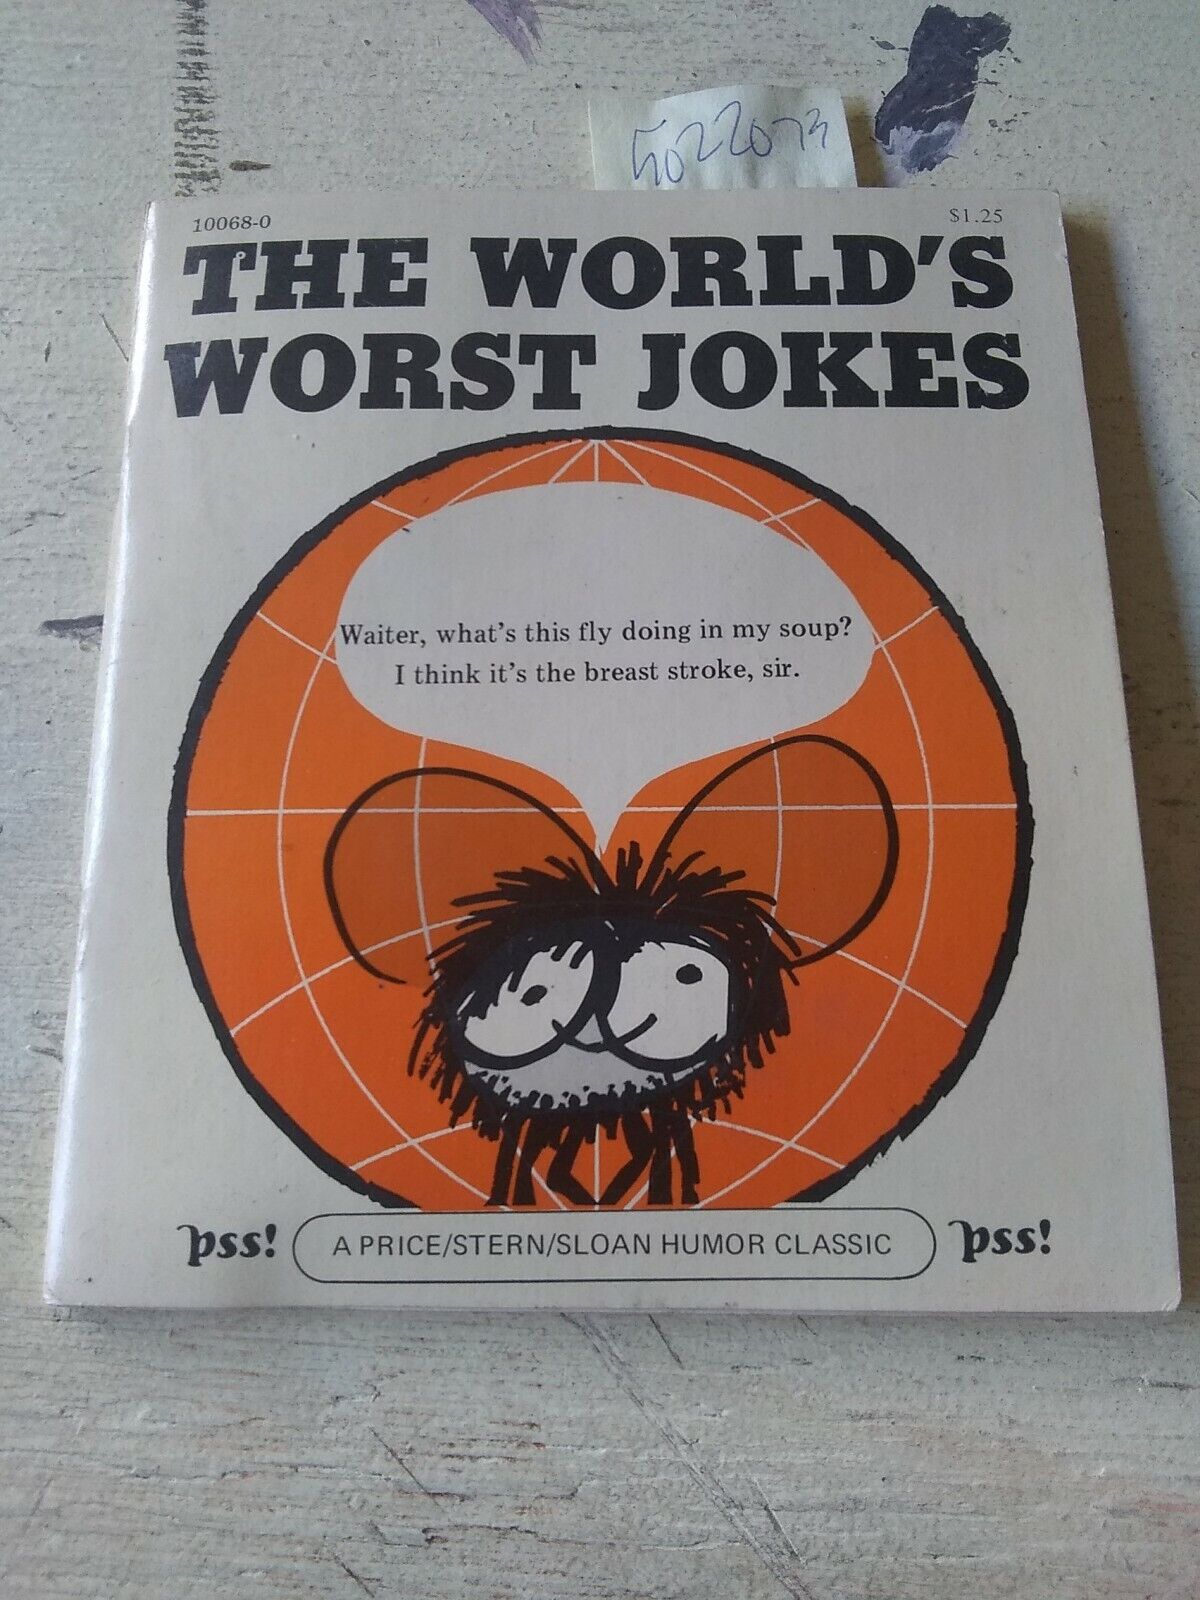 The World's Worst Jokes 1975 Price Stern Sloan PSS Humor Classic Ed Powers funny